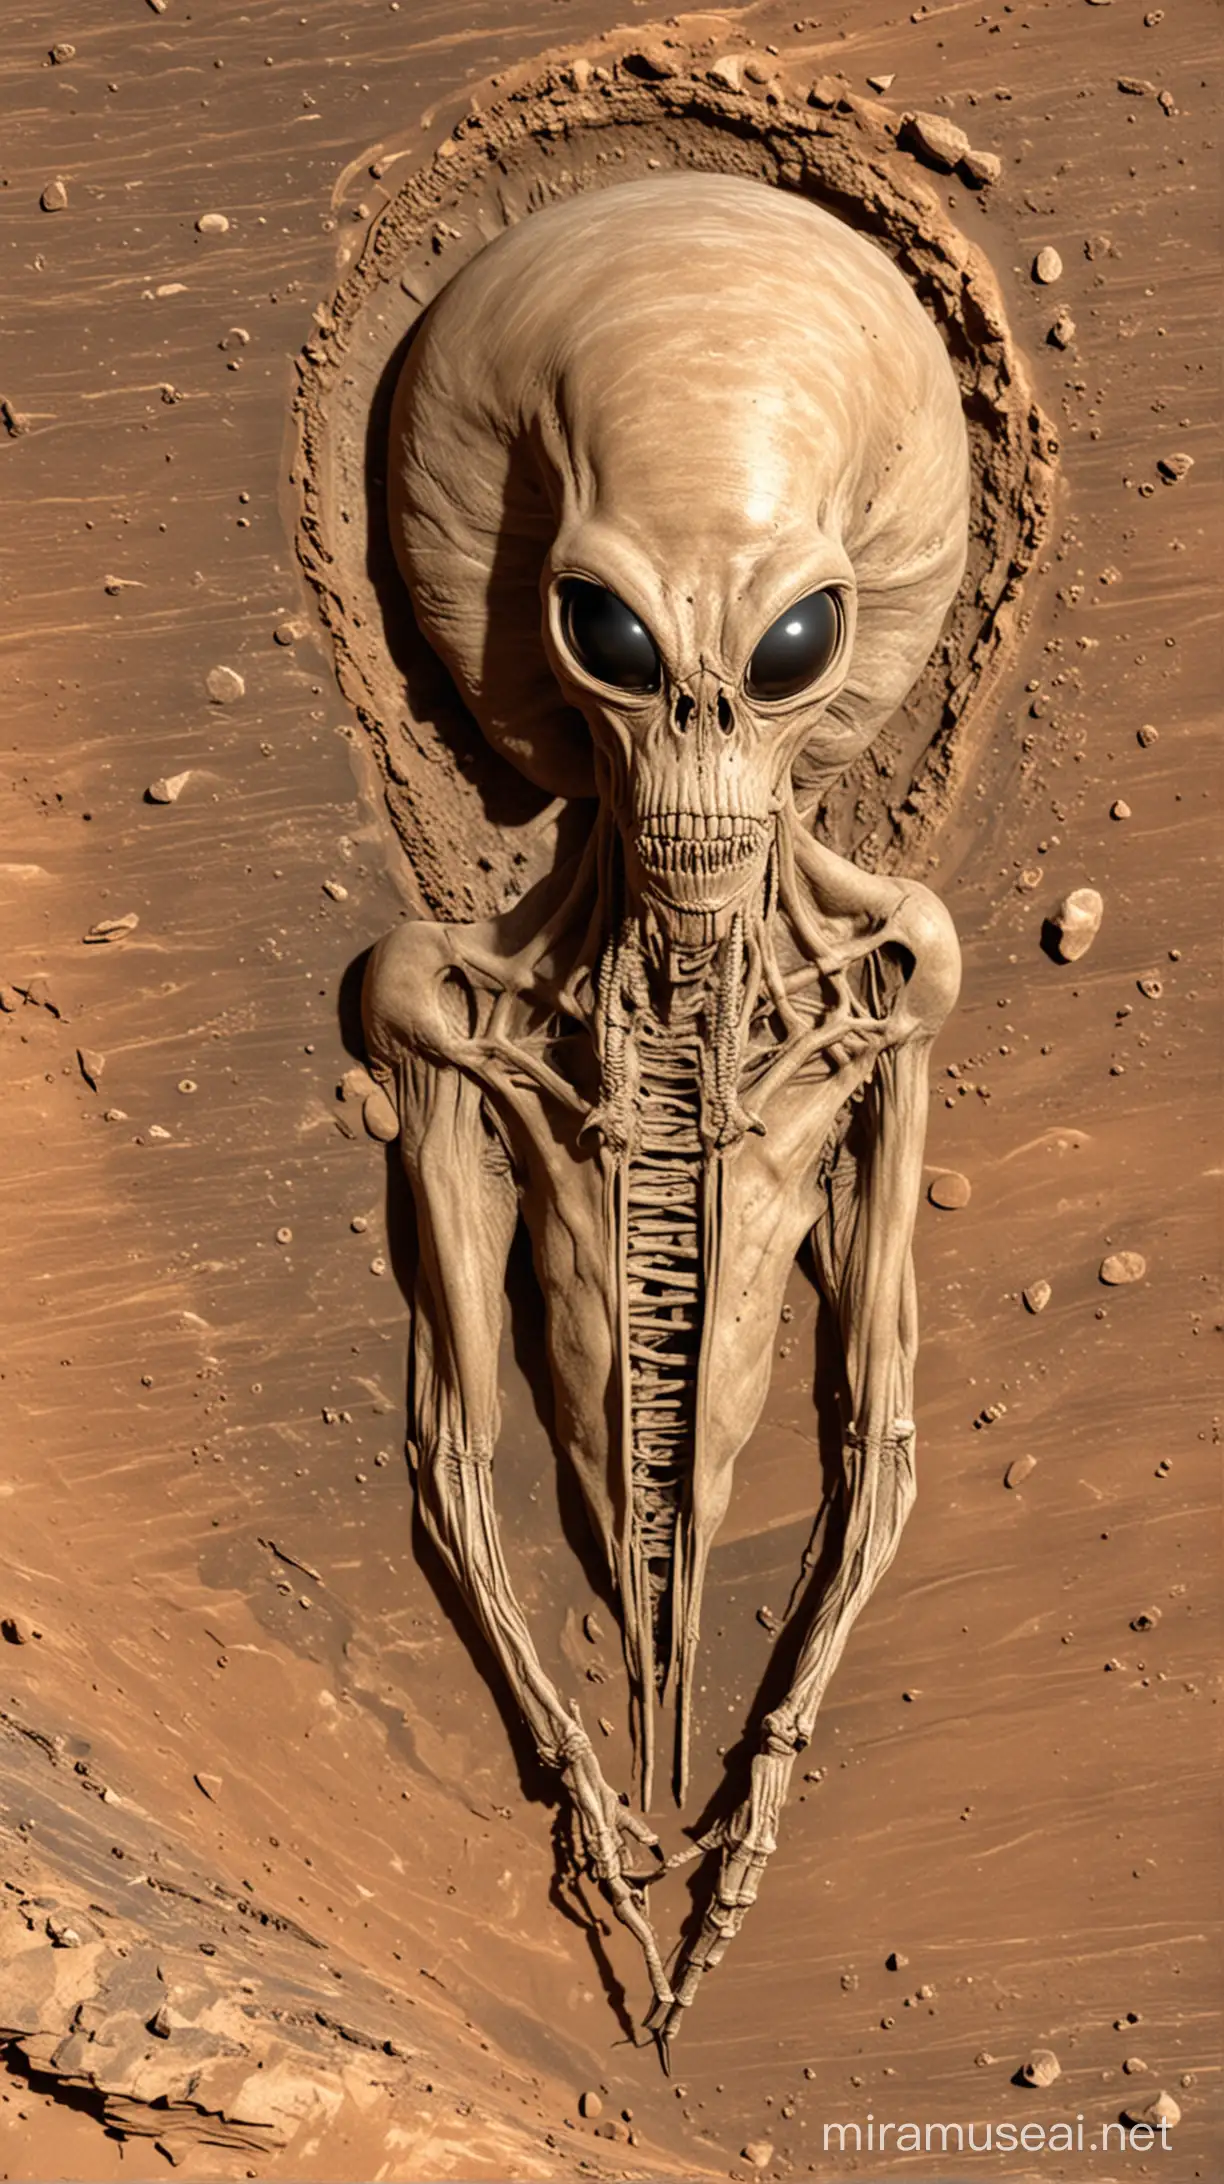 Mars Alien Fossils Uncovered by Scientists